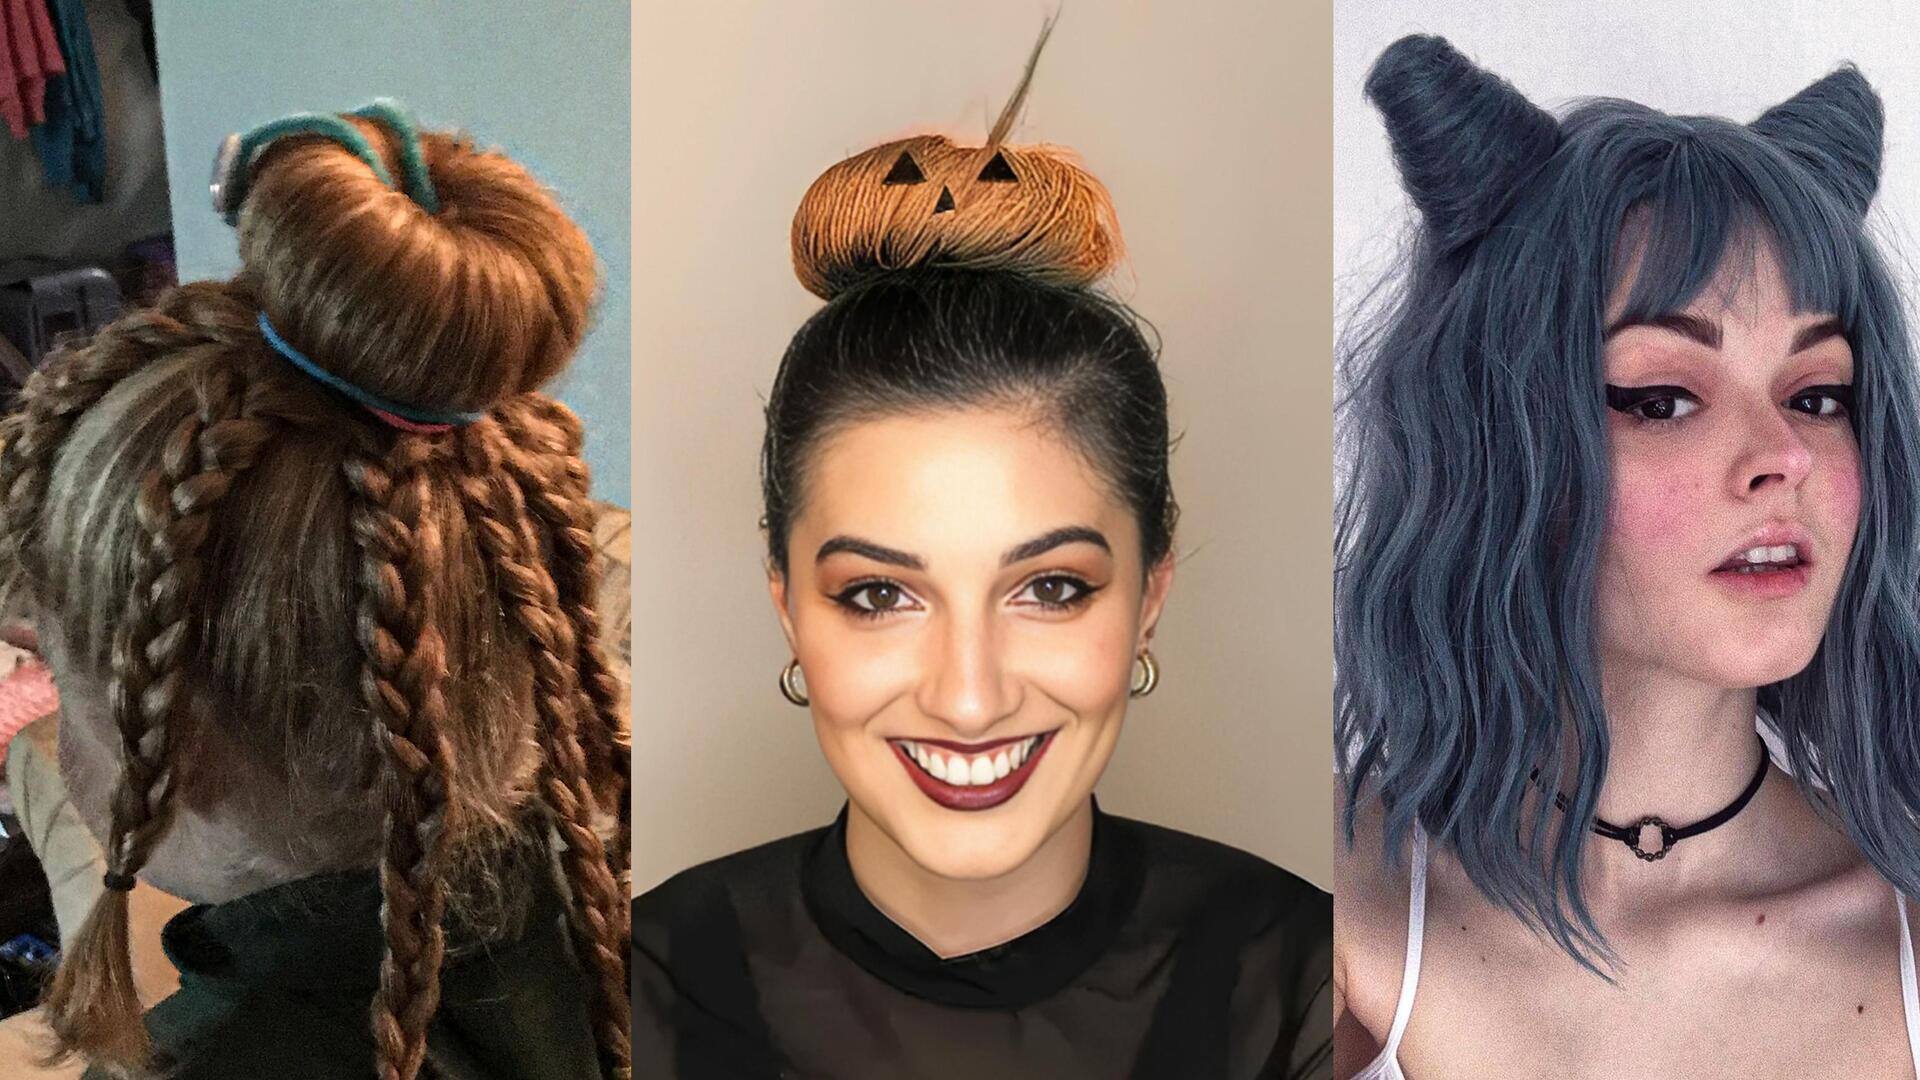 Try these Halloween hairstyles for a 'boo-tiful' look